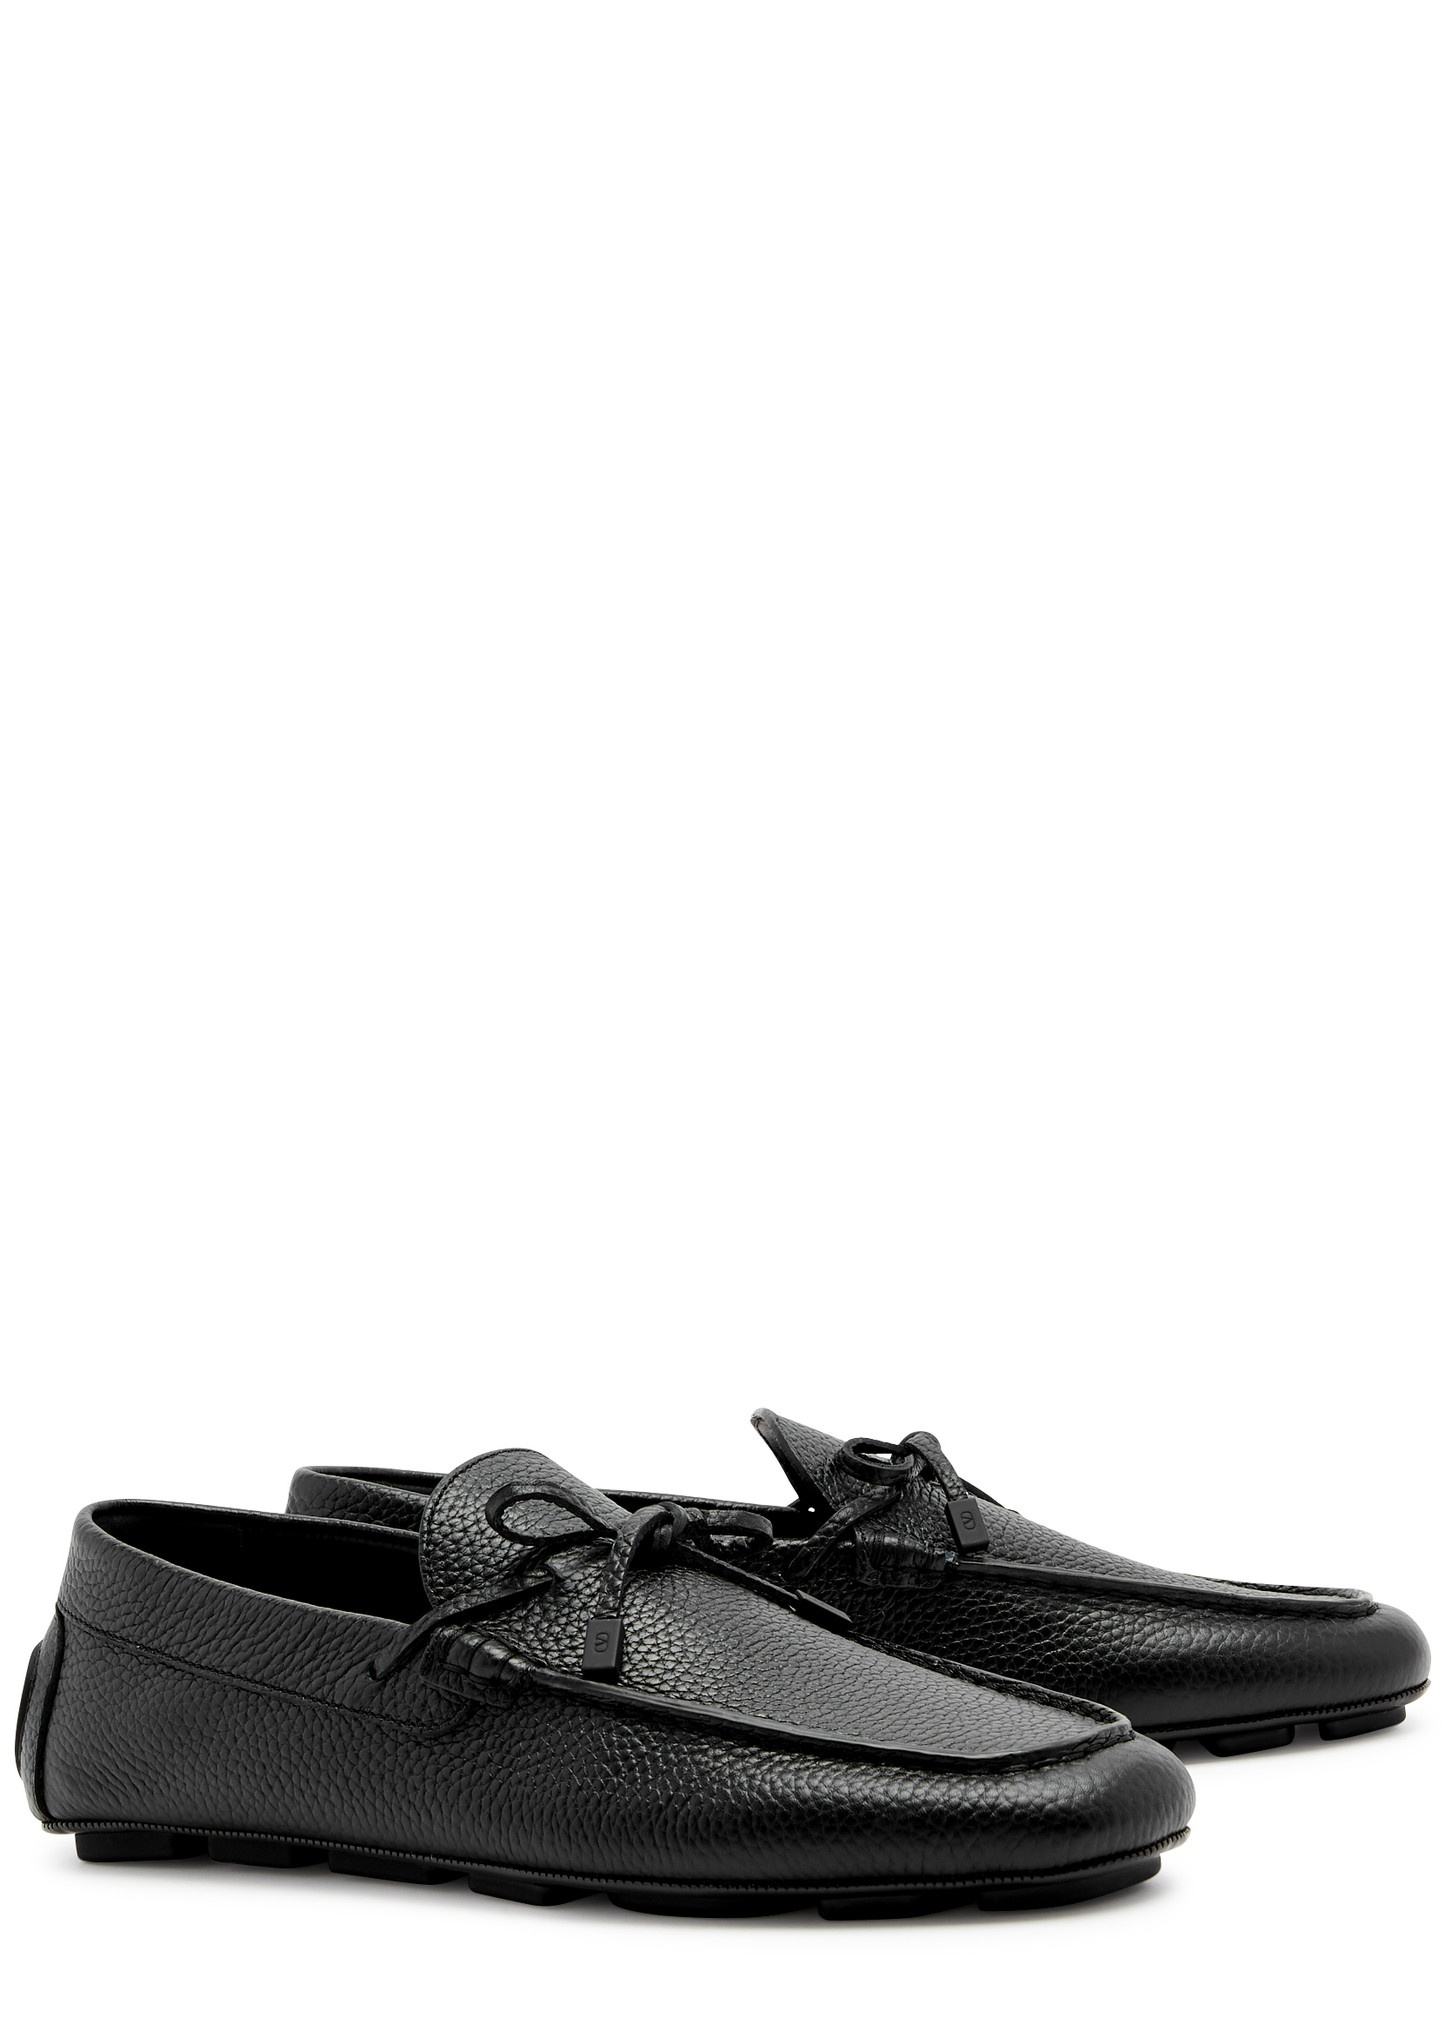 VLogo grained leather driving shoes - 2